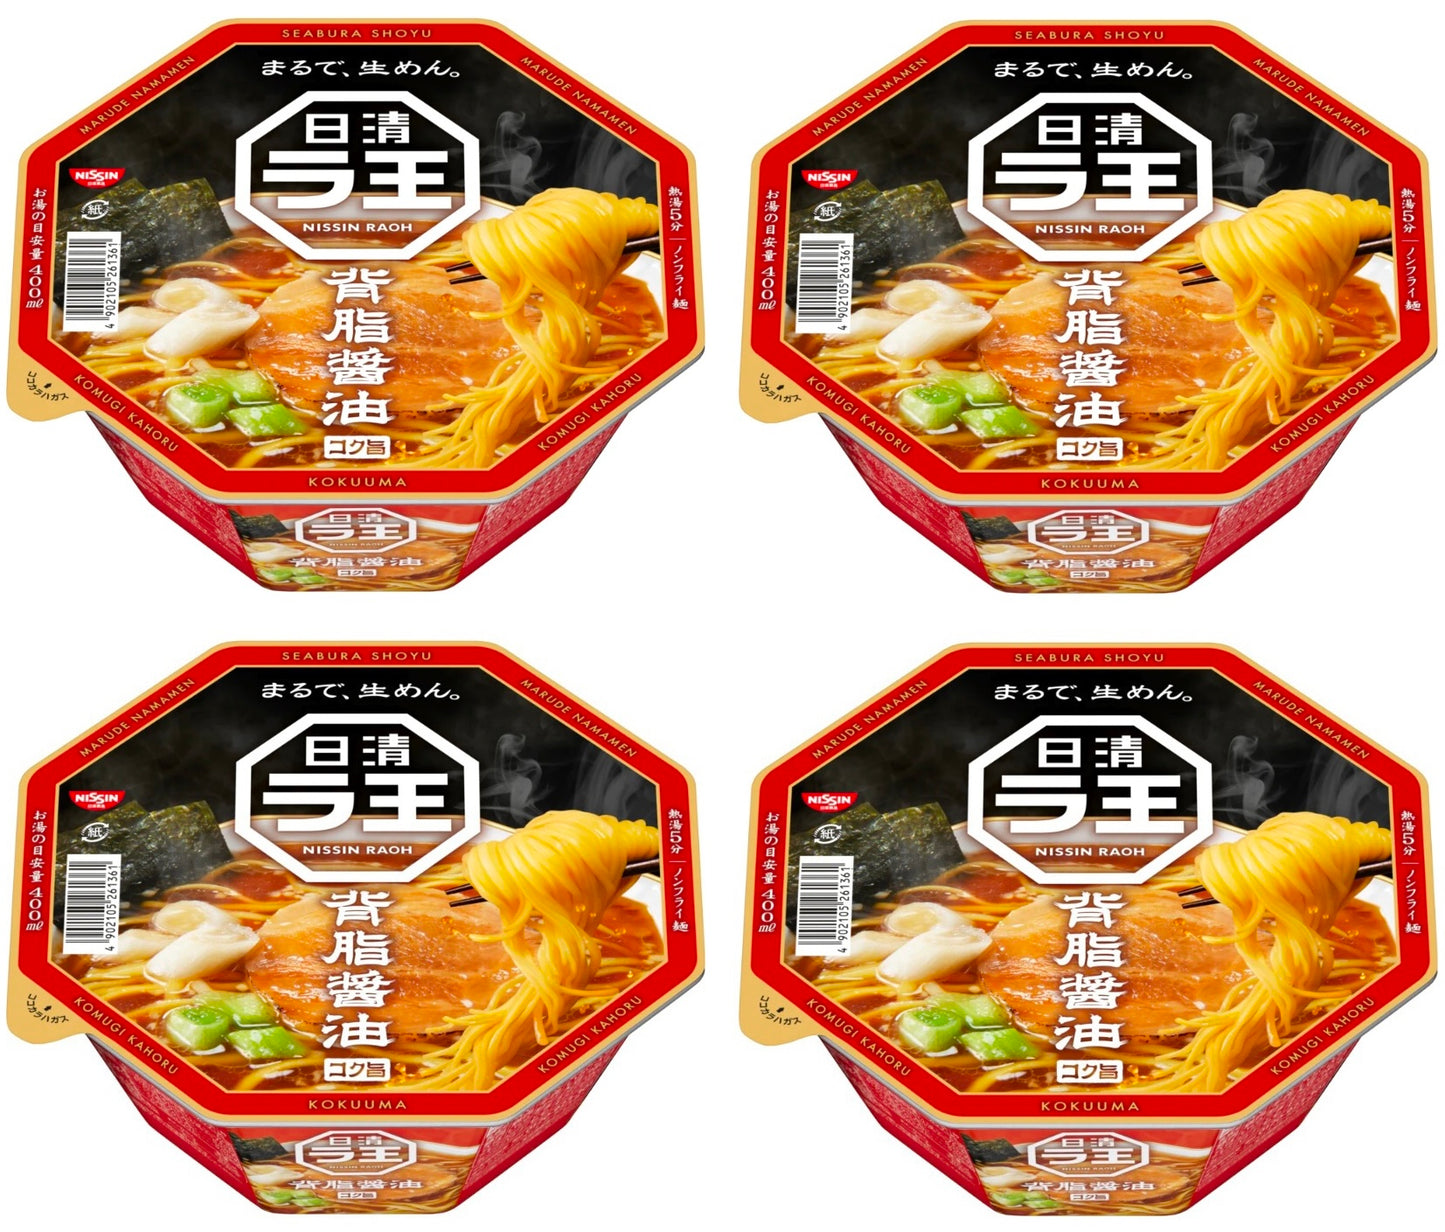 Nissin Noodles Ramen RAOH Soy Sauce Chicken Cup Soup Instant Food Japanese 112g